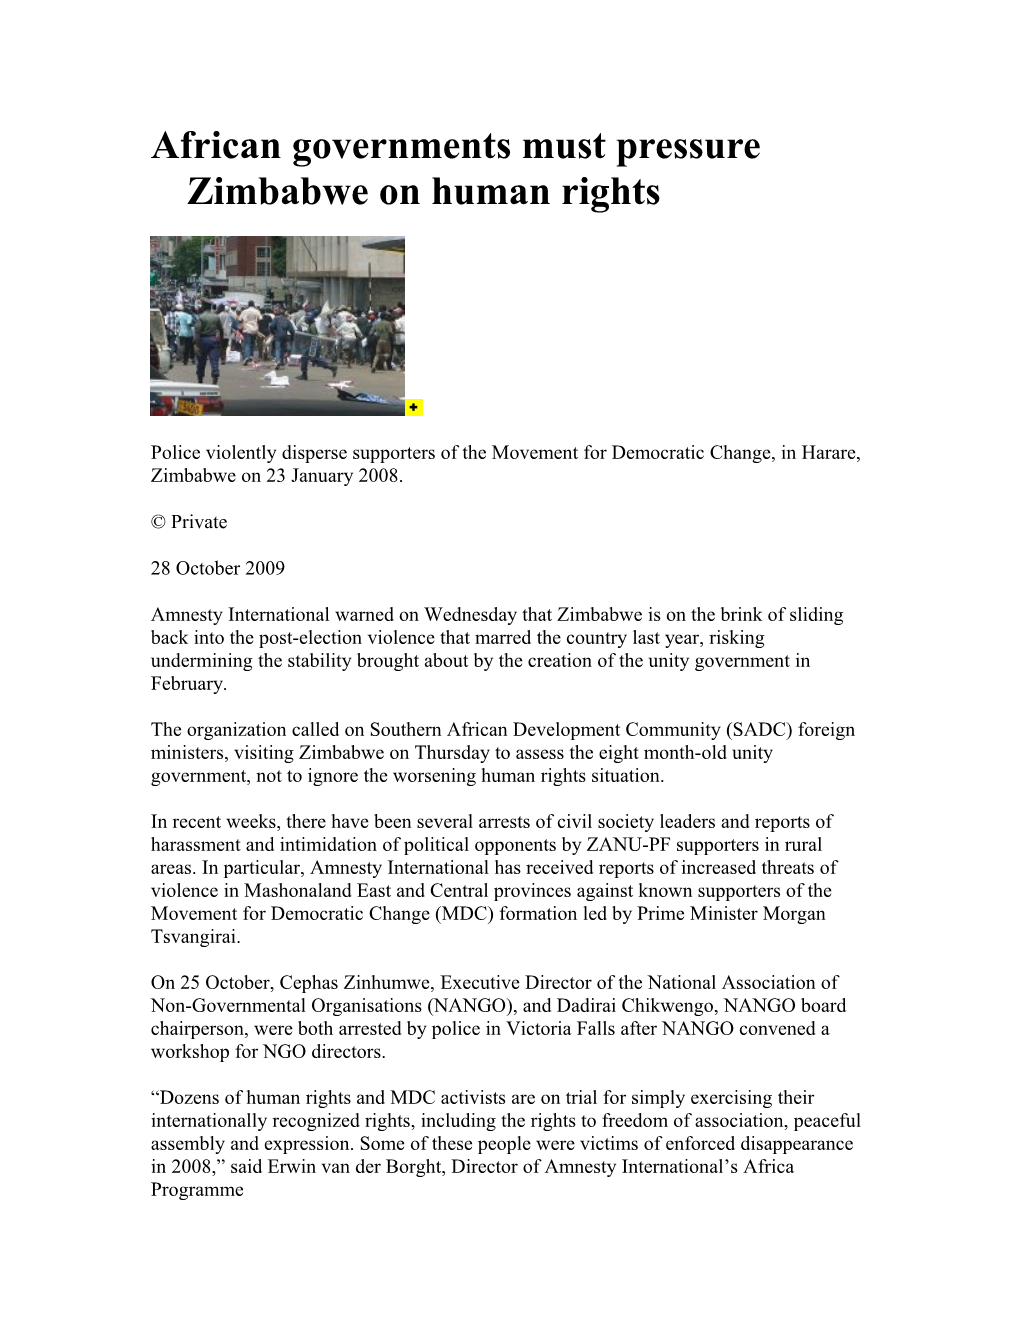 African Governments Must Pressure Zimbabwe on Human Rights